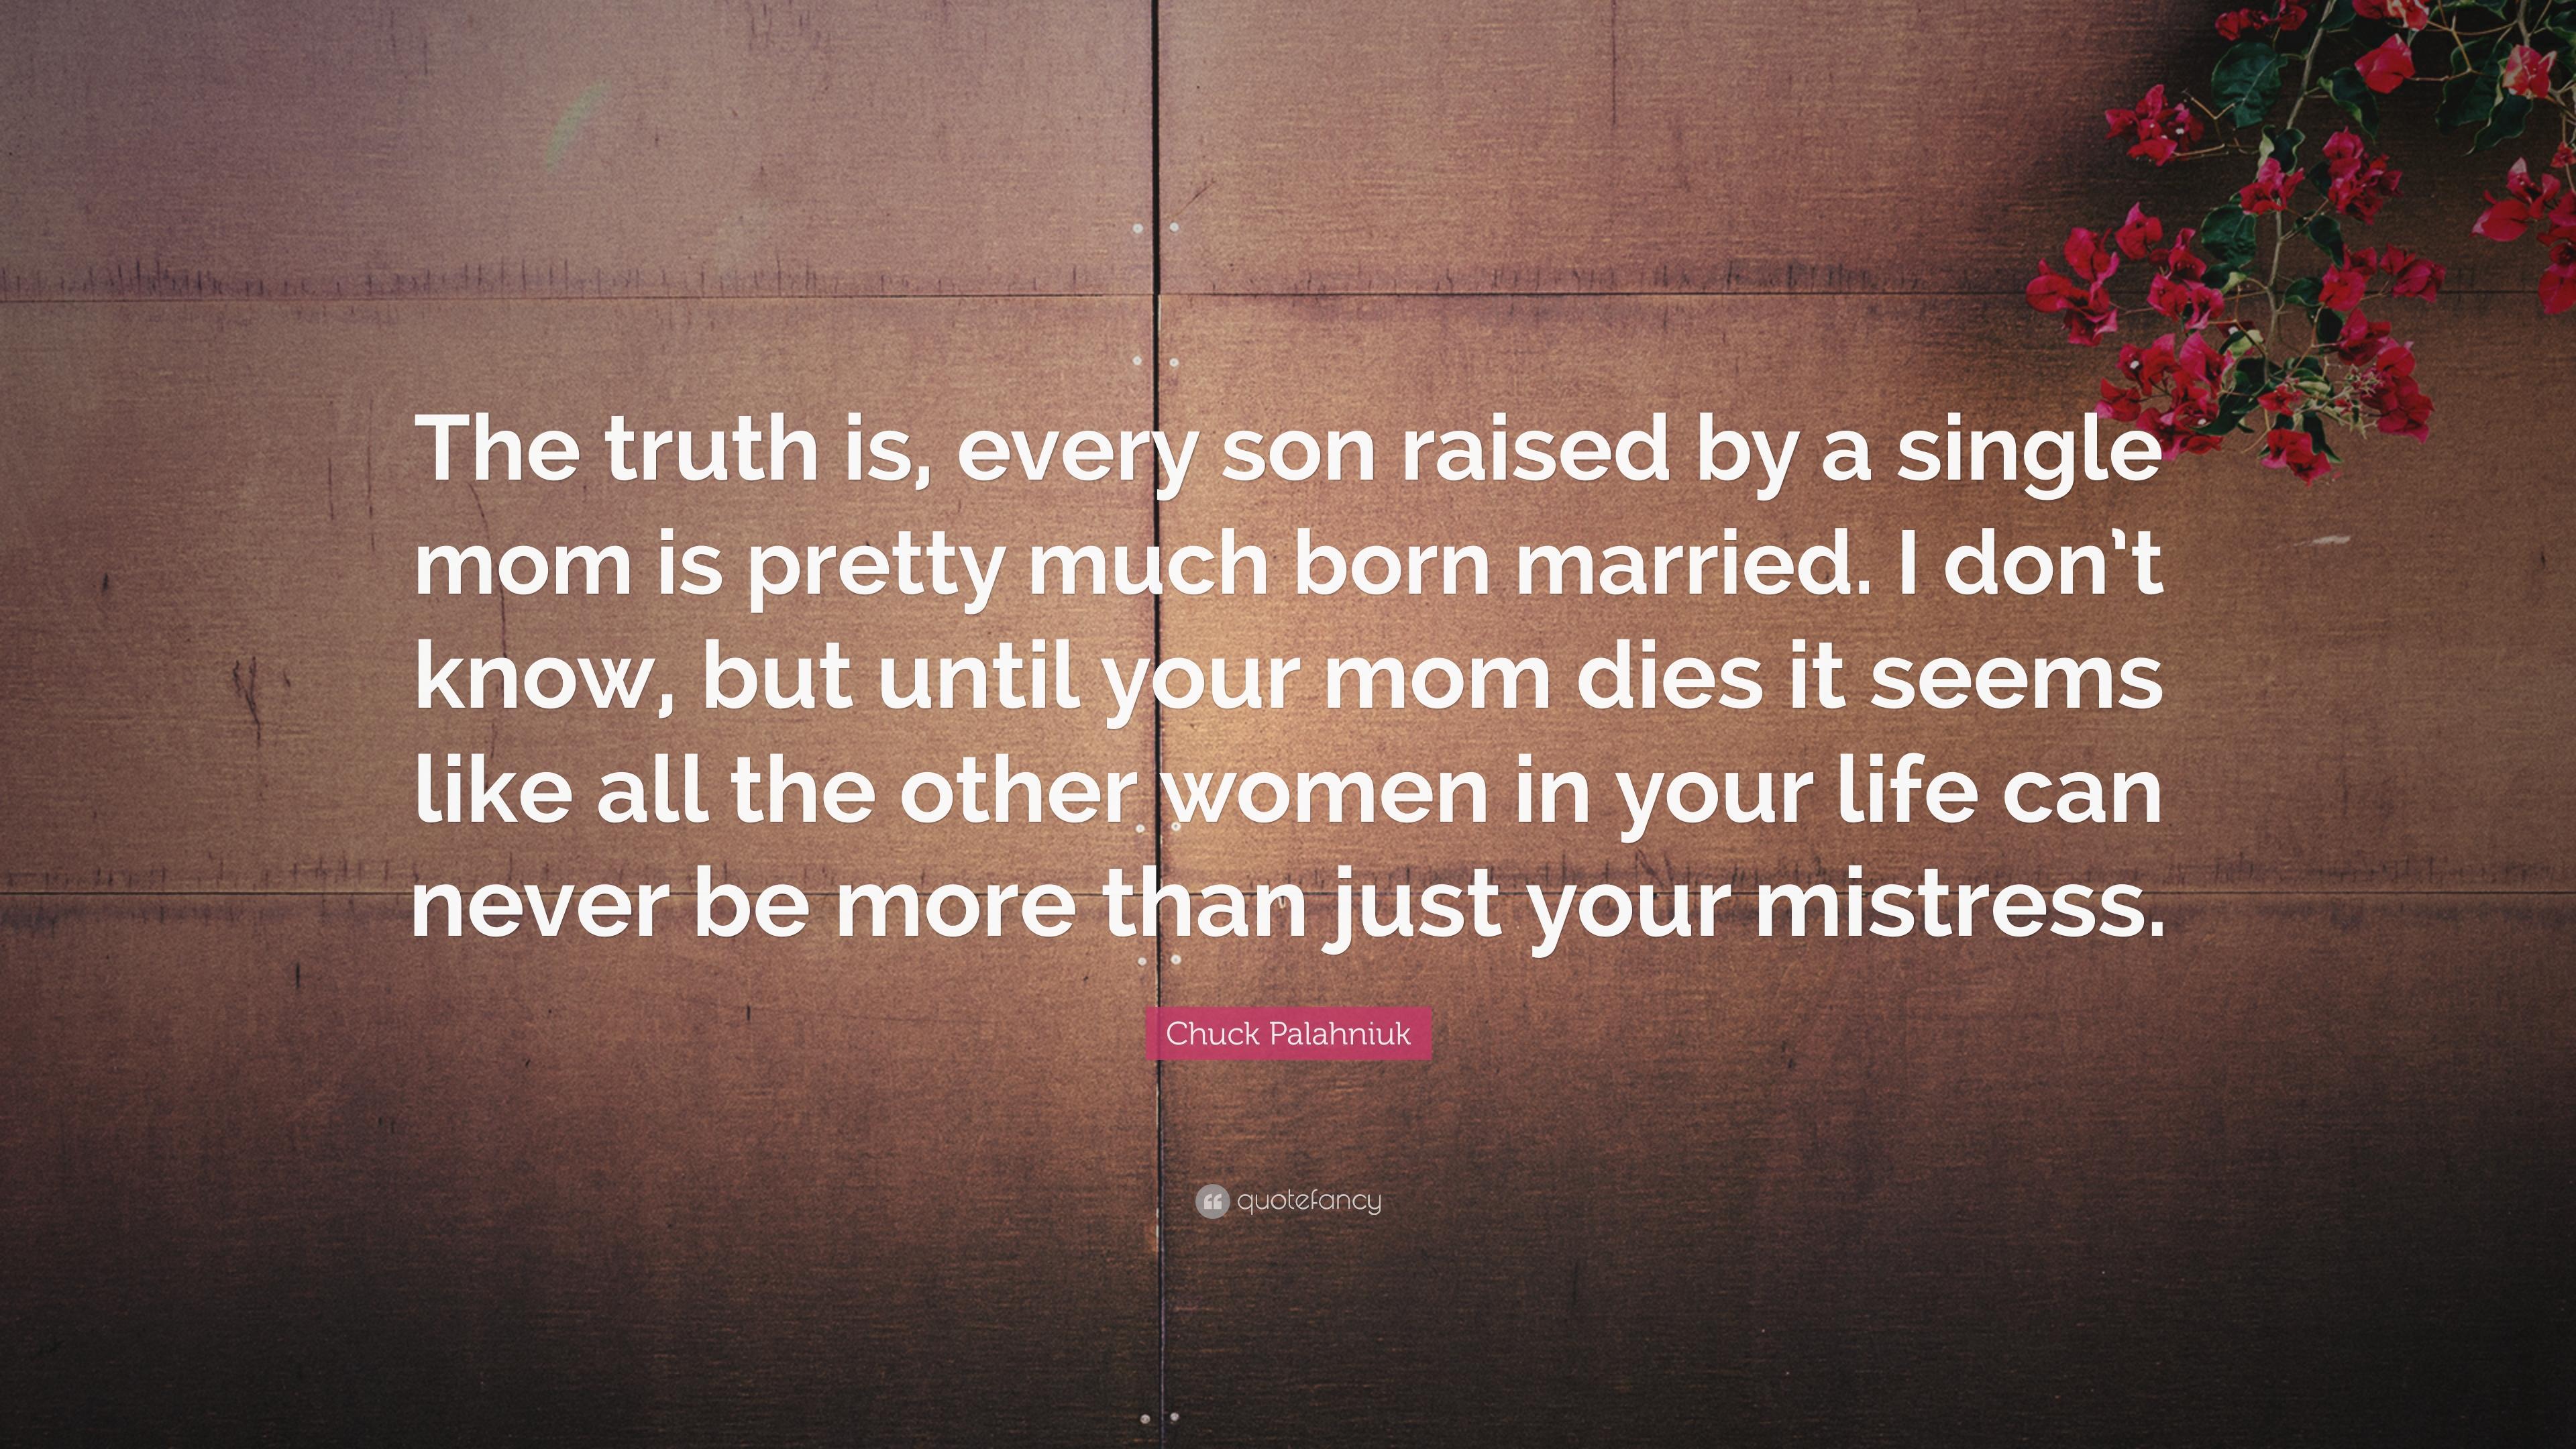 Chuck Palahniuk Quote: “The truth is, every son raised